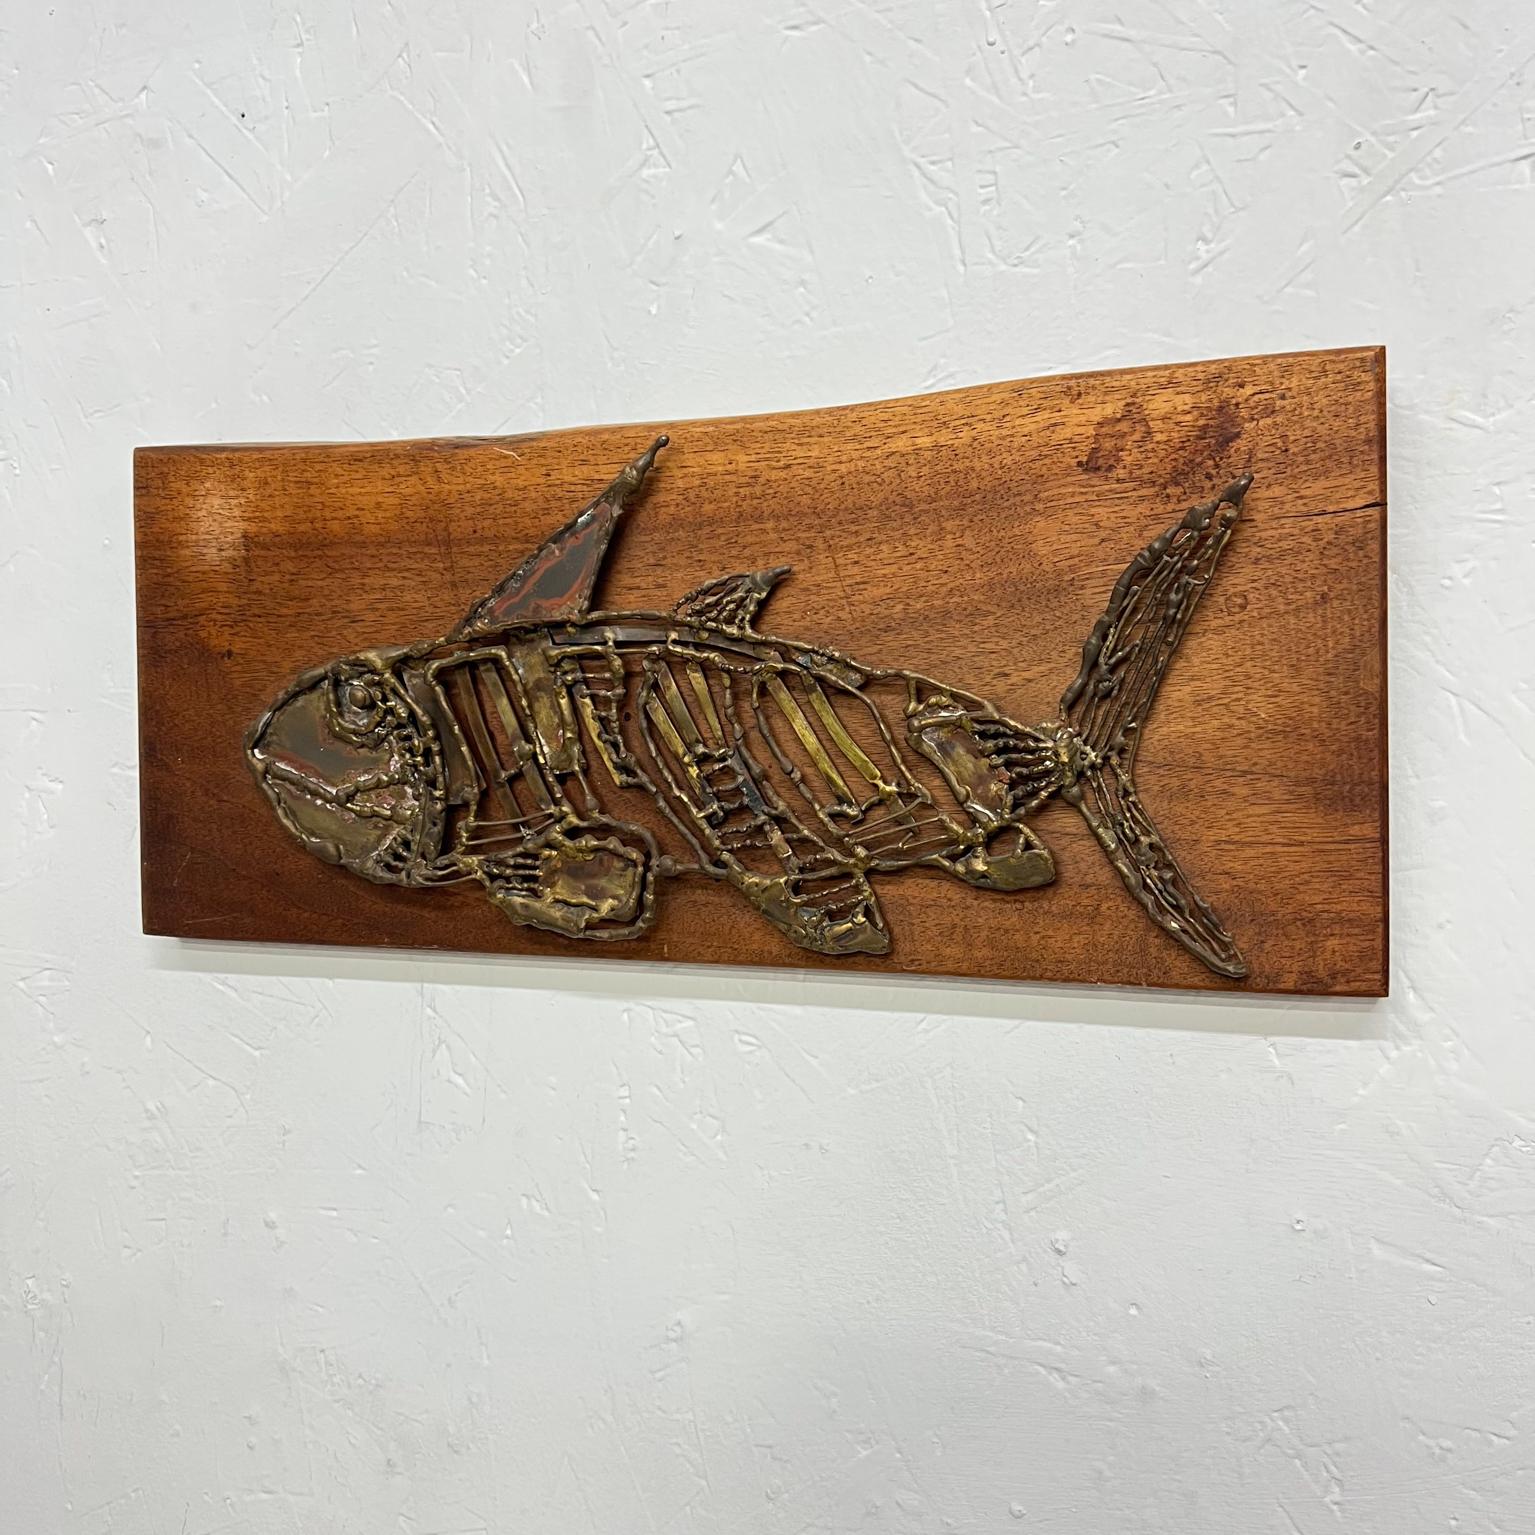 1970s Modern Brutalist Wall Art Bronzed Metal Fish on Wood Plaque For Sale 3